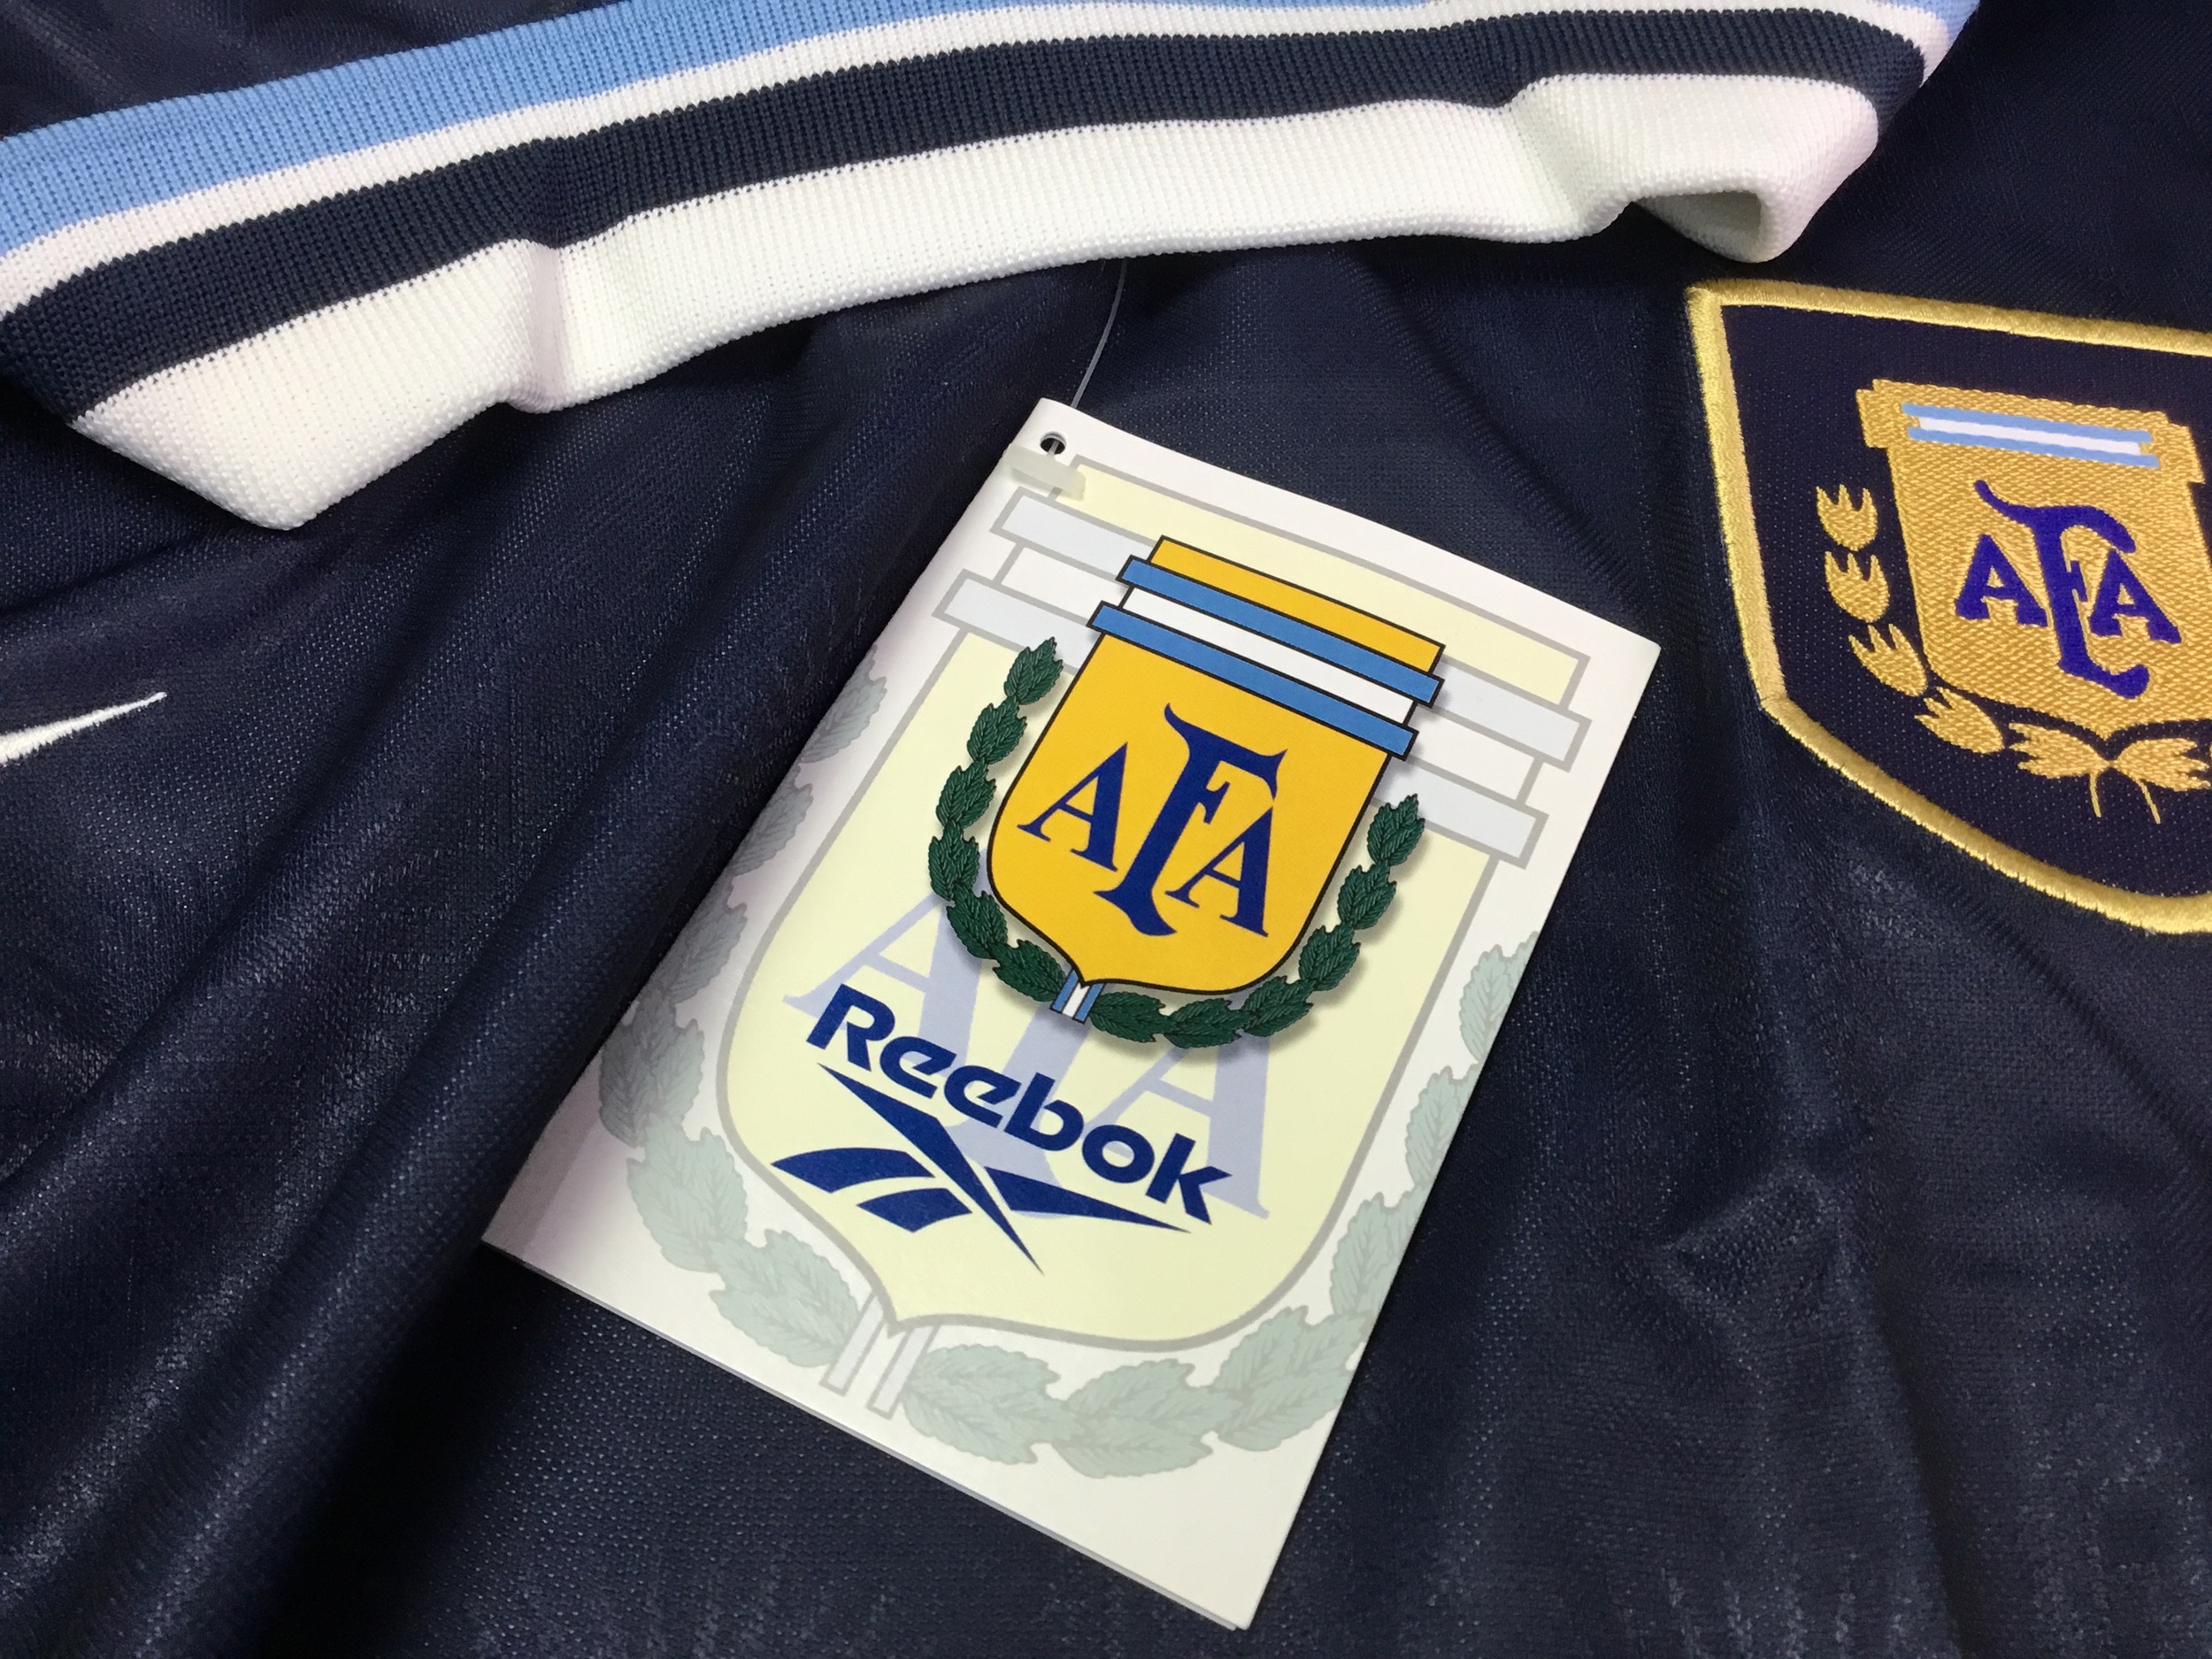 ARGENTINA REPLICA 2000/01 HOME & AWAY JERSEYS - Image 4 of 4